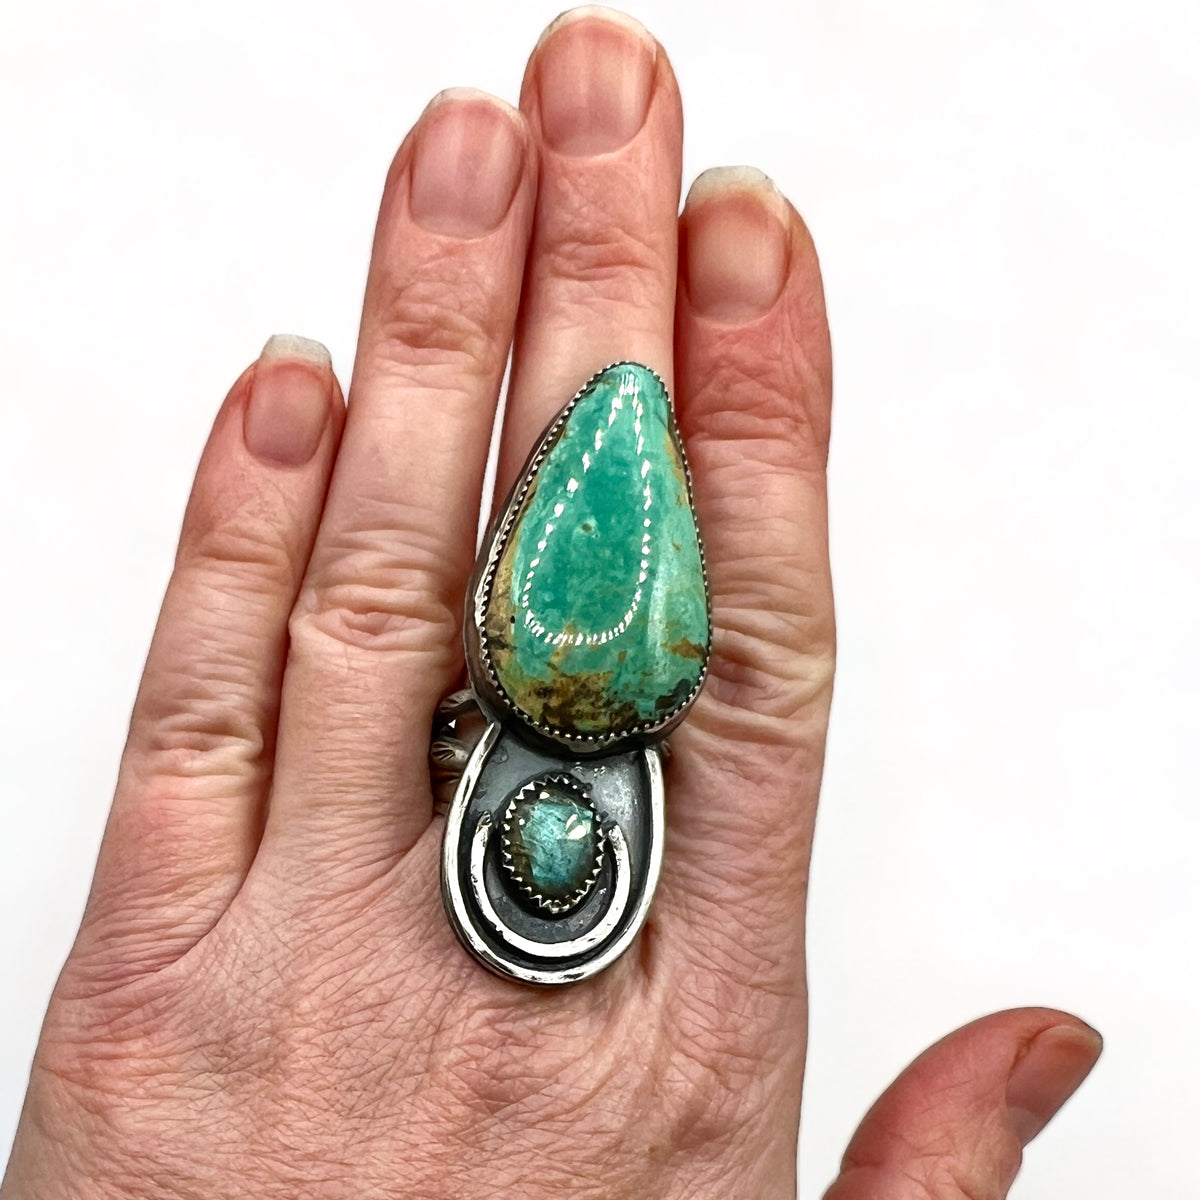 Turquoise and Labradorite Ring size 9.5